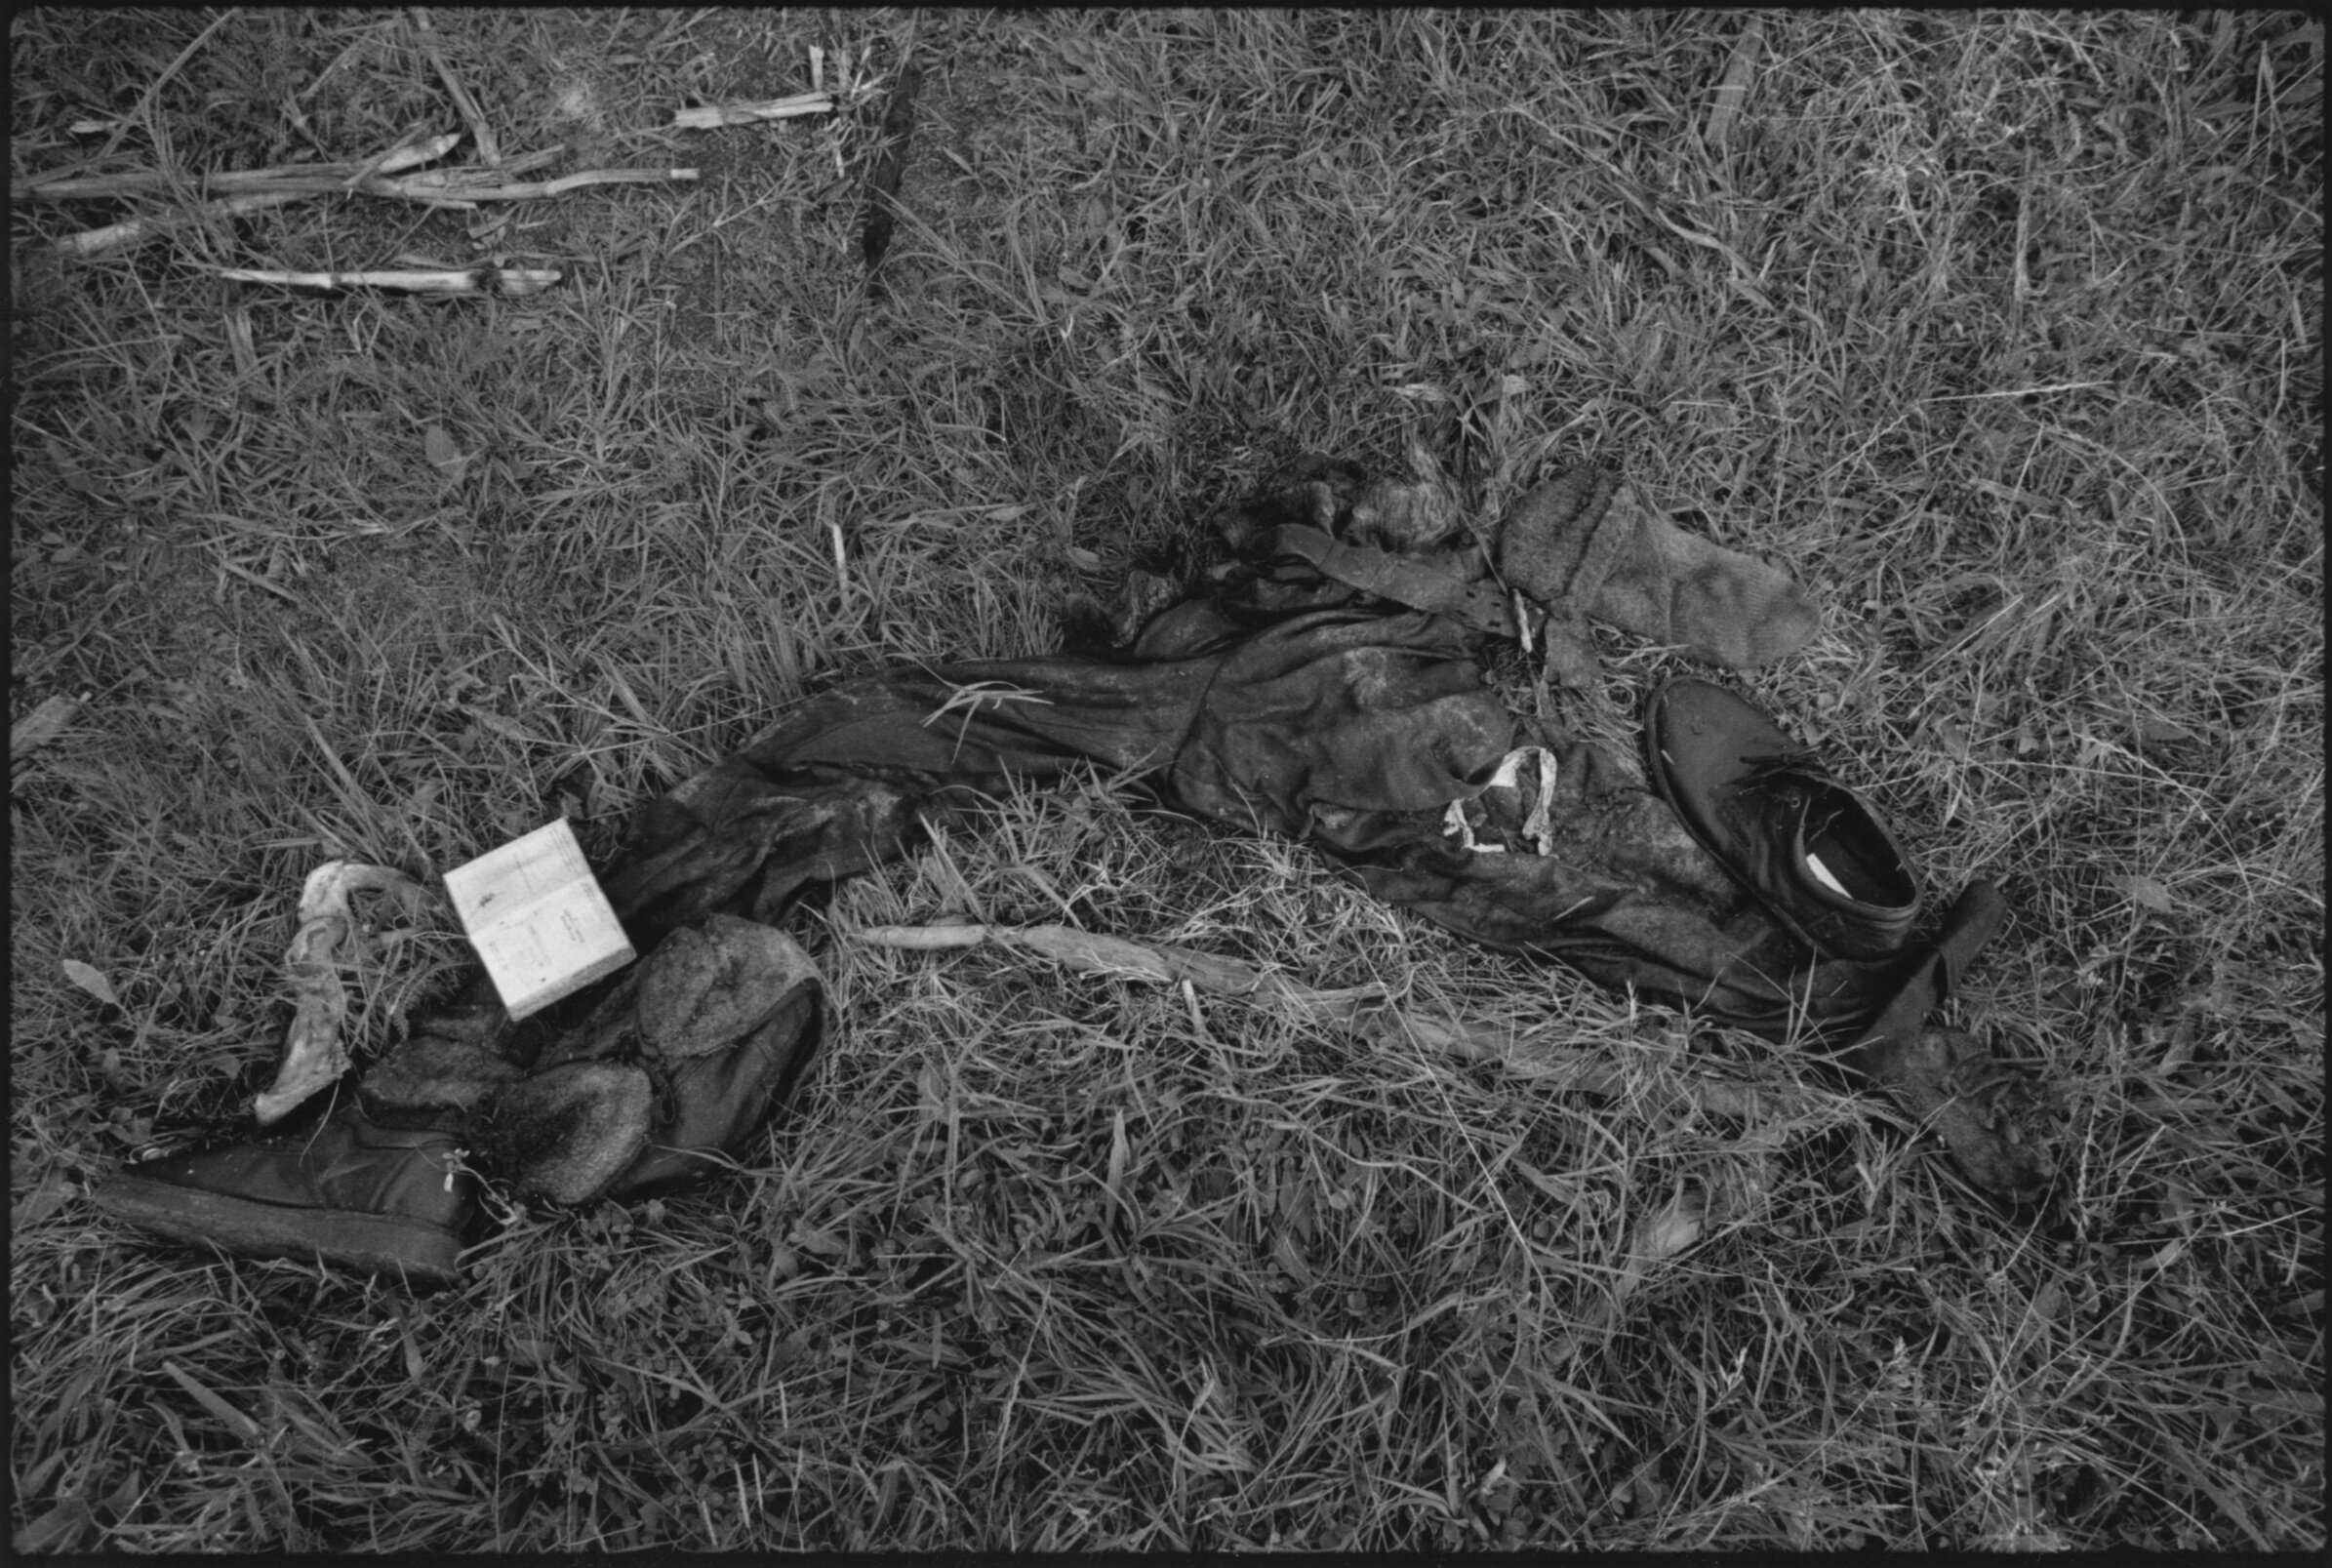  Human remains in a field near the village of Meja where refugees reported hundreds of men were murdered by Serb paramilitary forces. 